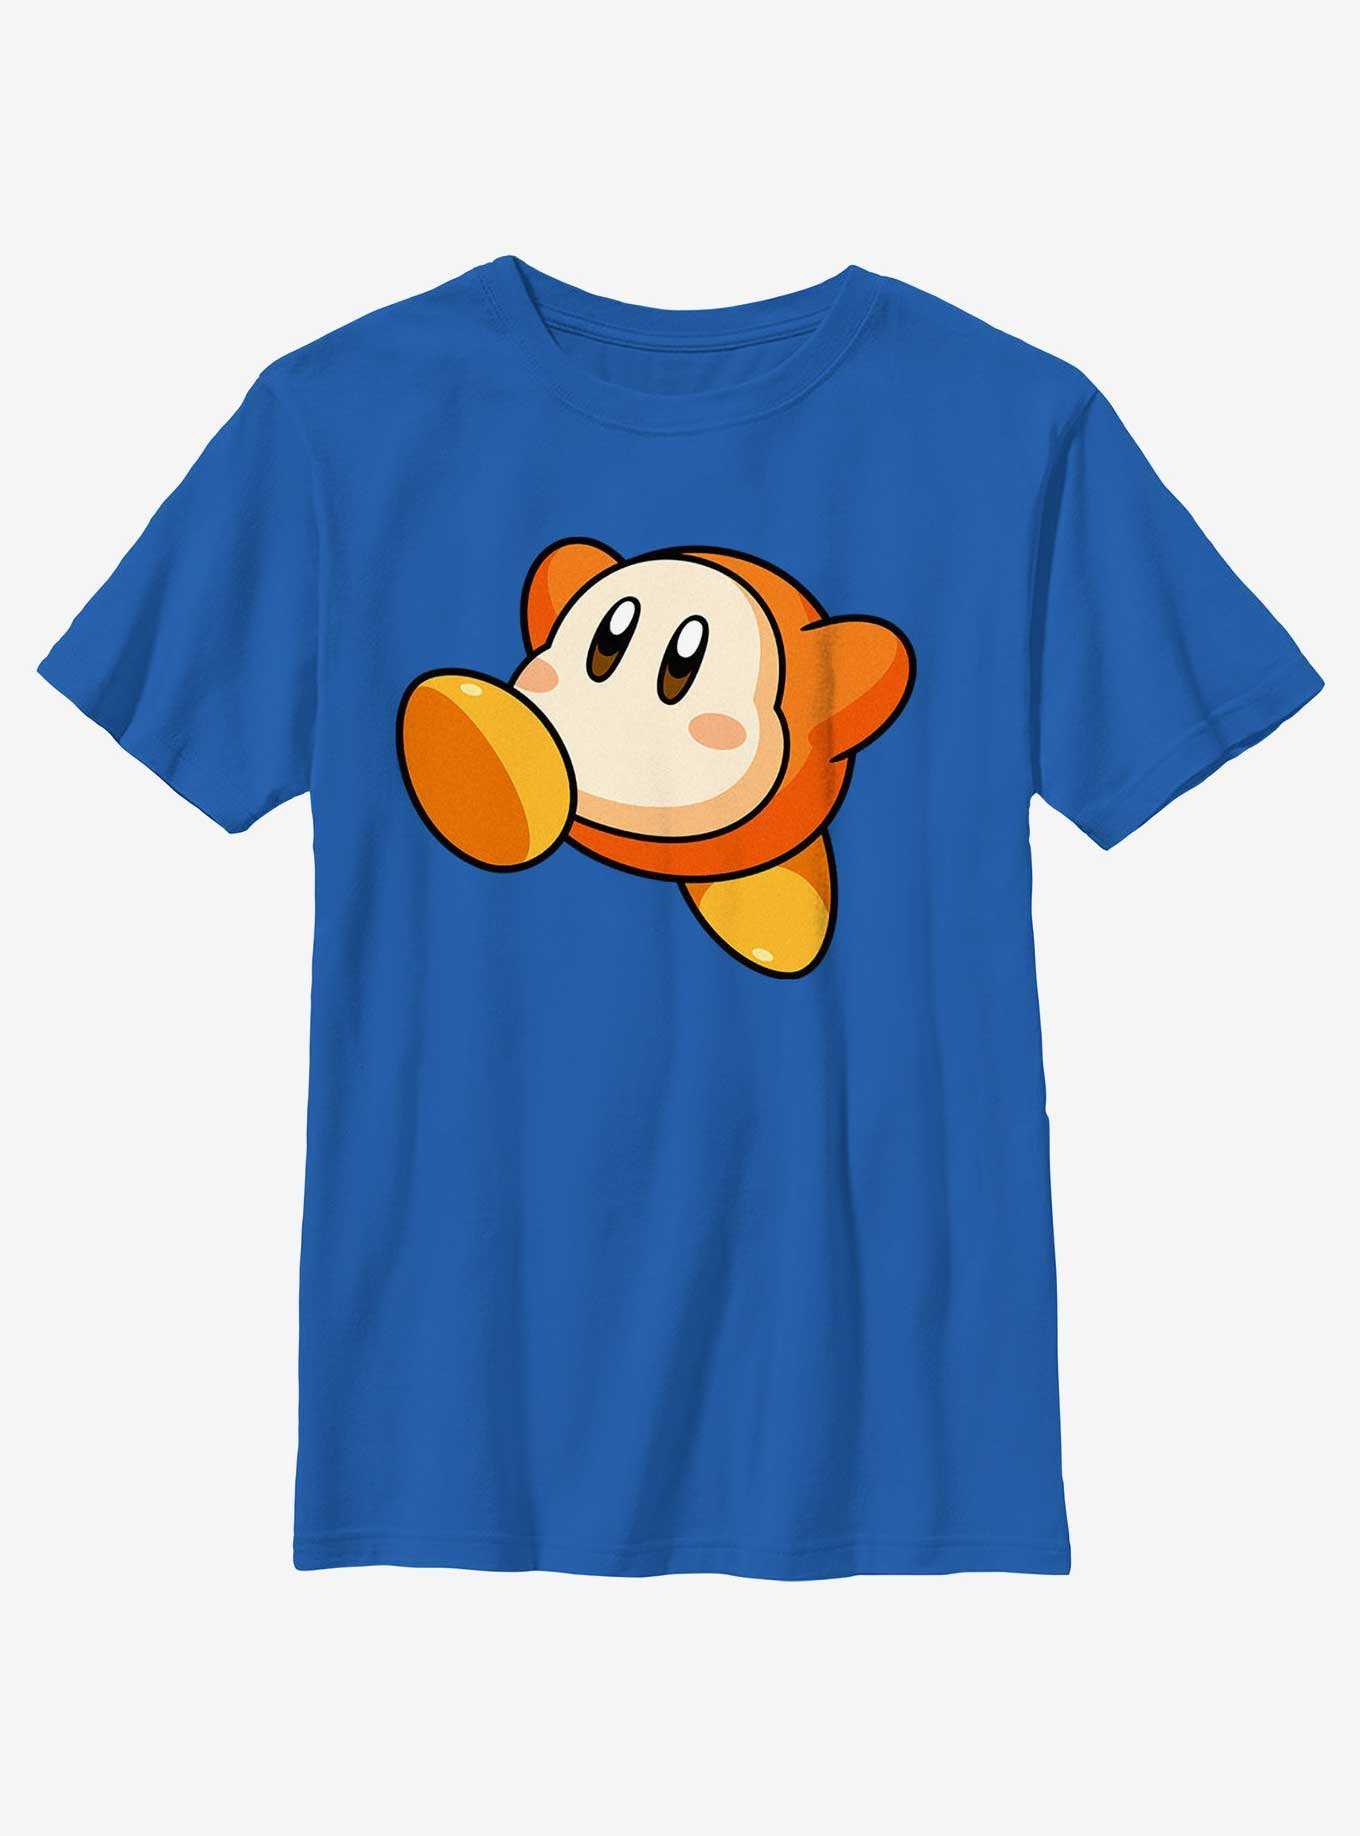 Kirby Waddle Dee Youth T-Shirt, , hi-res